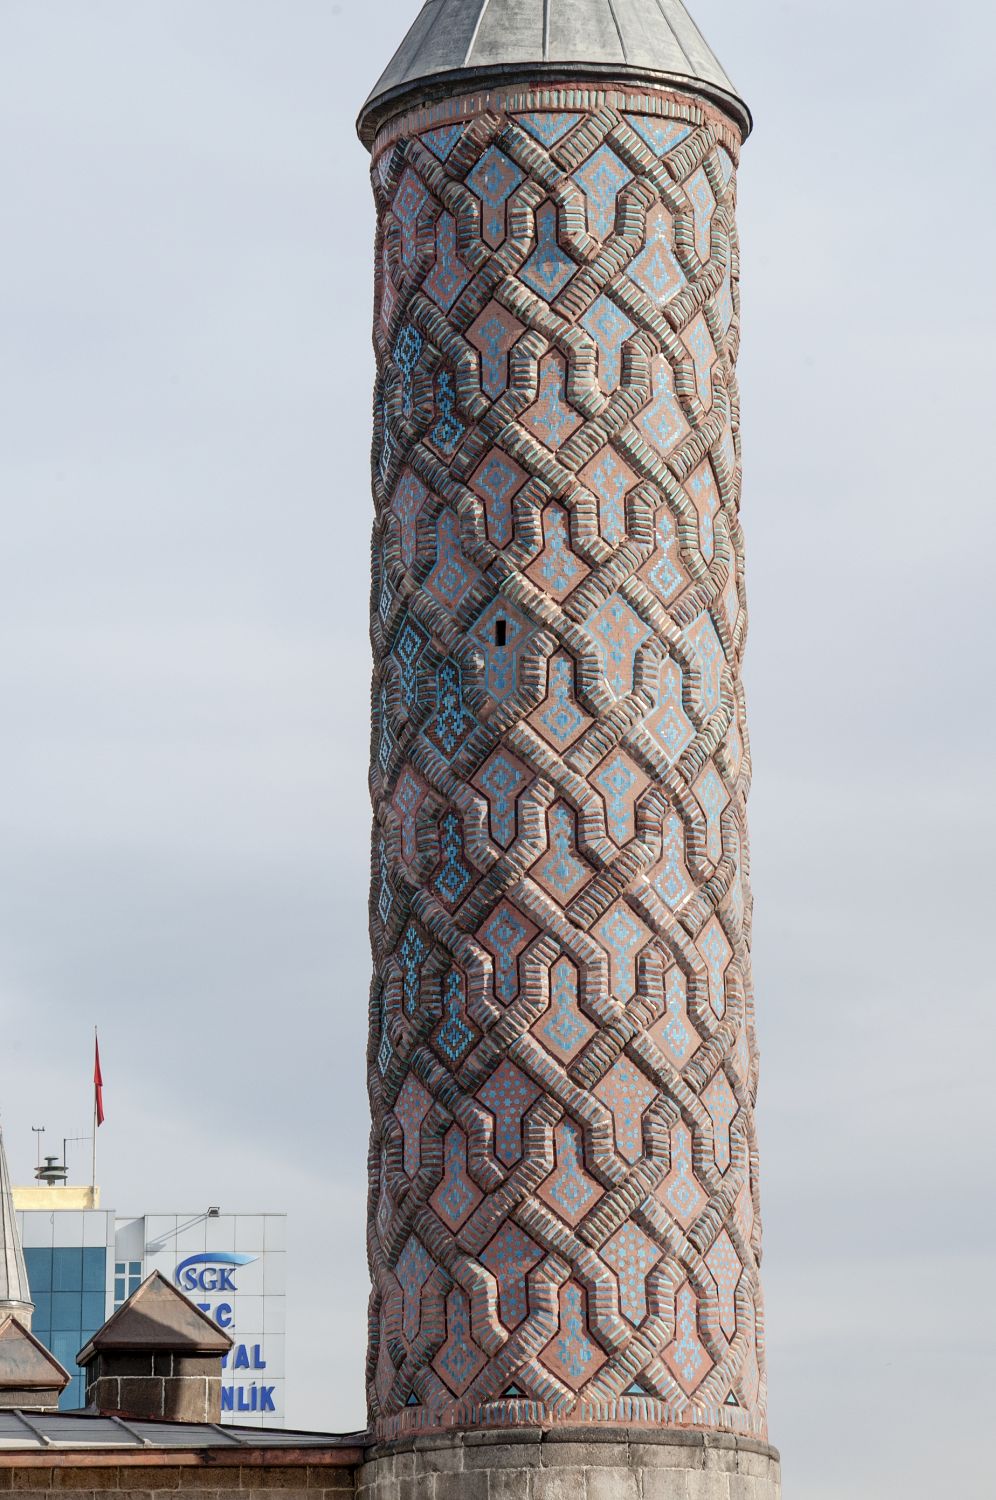 Exterior view of minaret on southern corner of building, showing knotwork decoration.